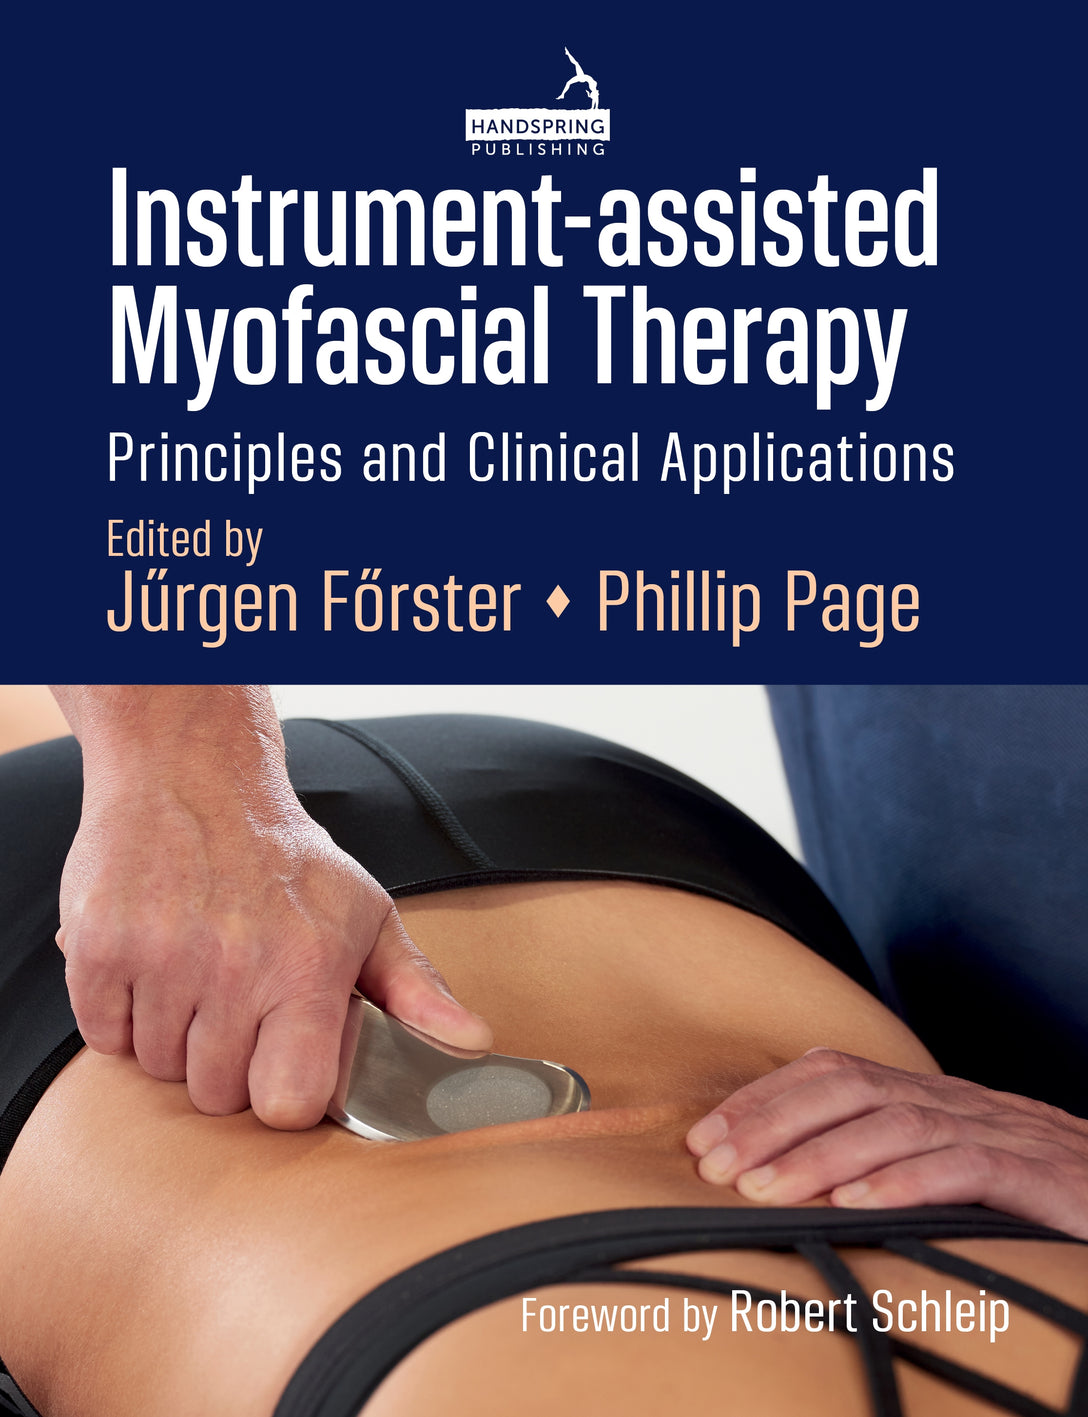 Instrument-assisted Myofascial Therapy by Phil Page, Jürgen Förster